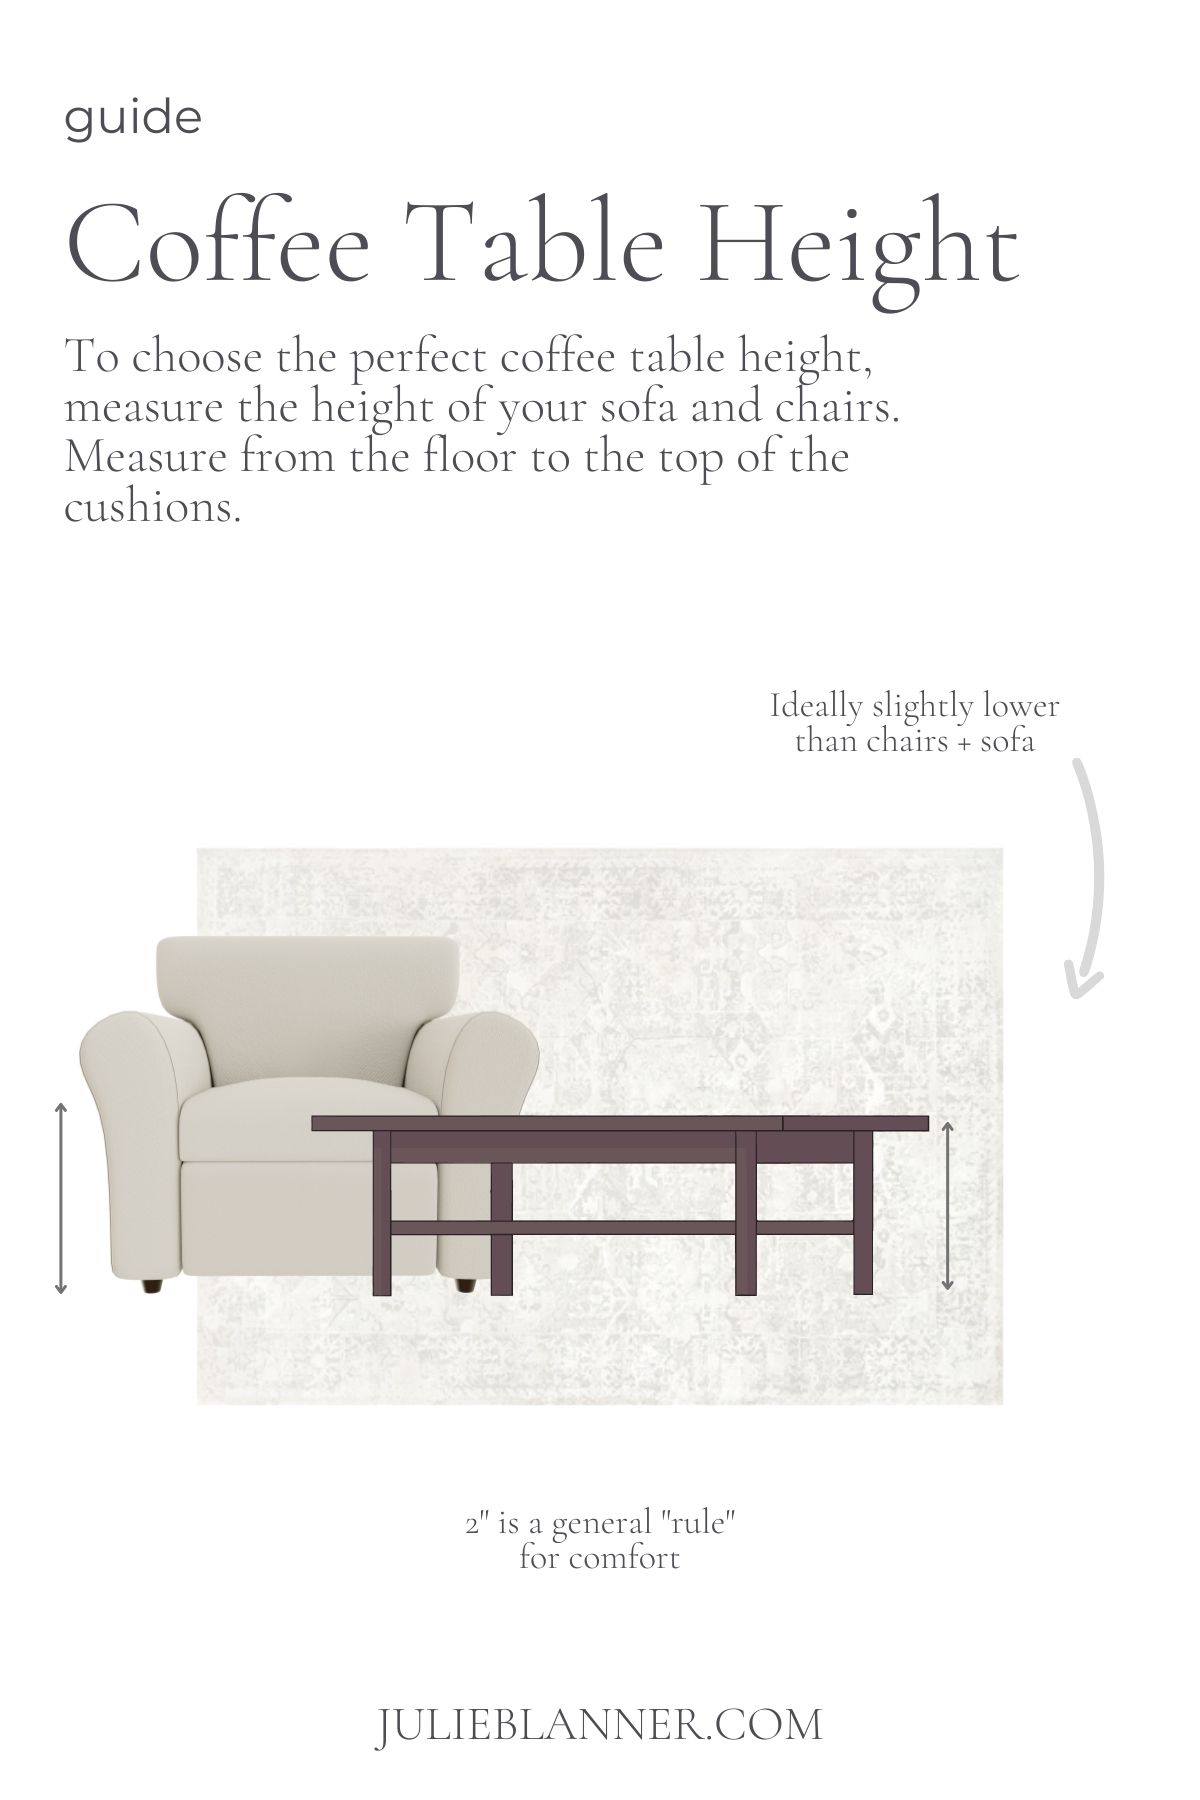 A graphic image featuring an upholstered chair, rug, and coffee table. Title reads 